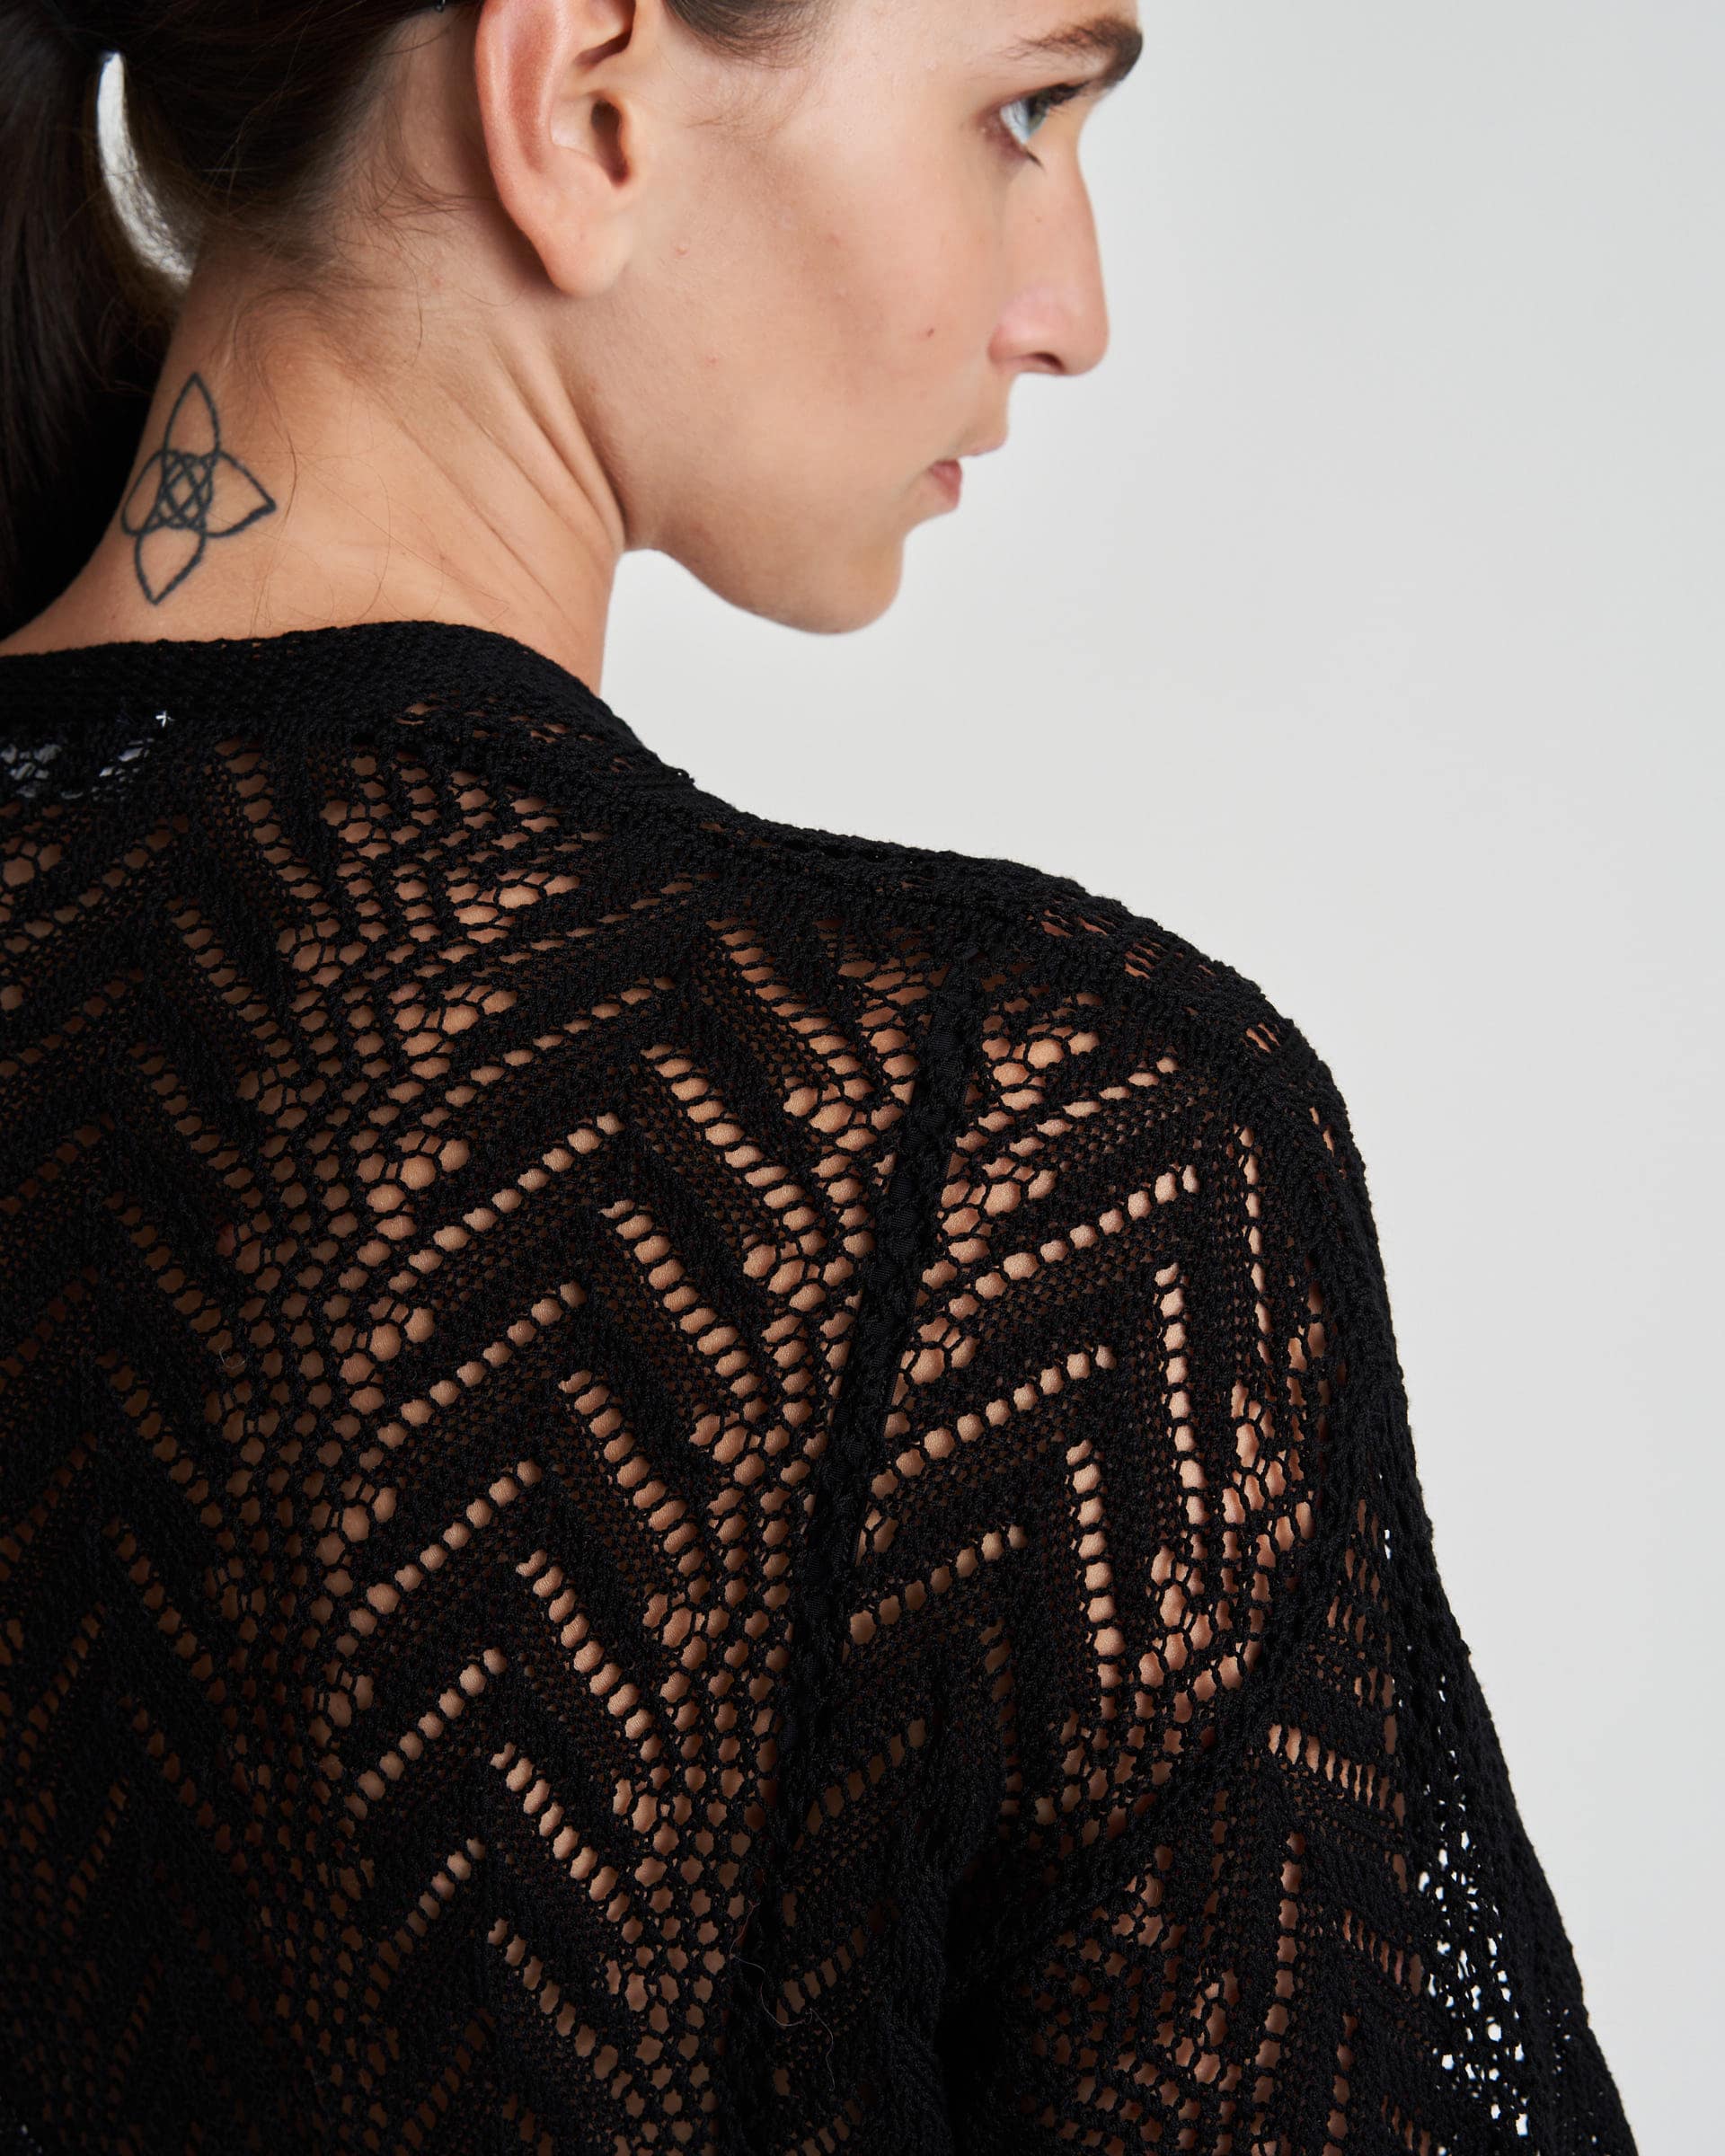 The Market Store | Perforated Knit Cardigan